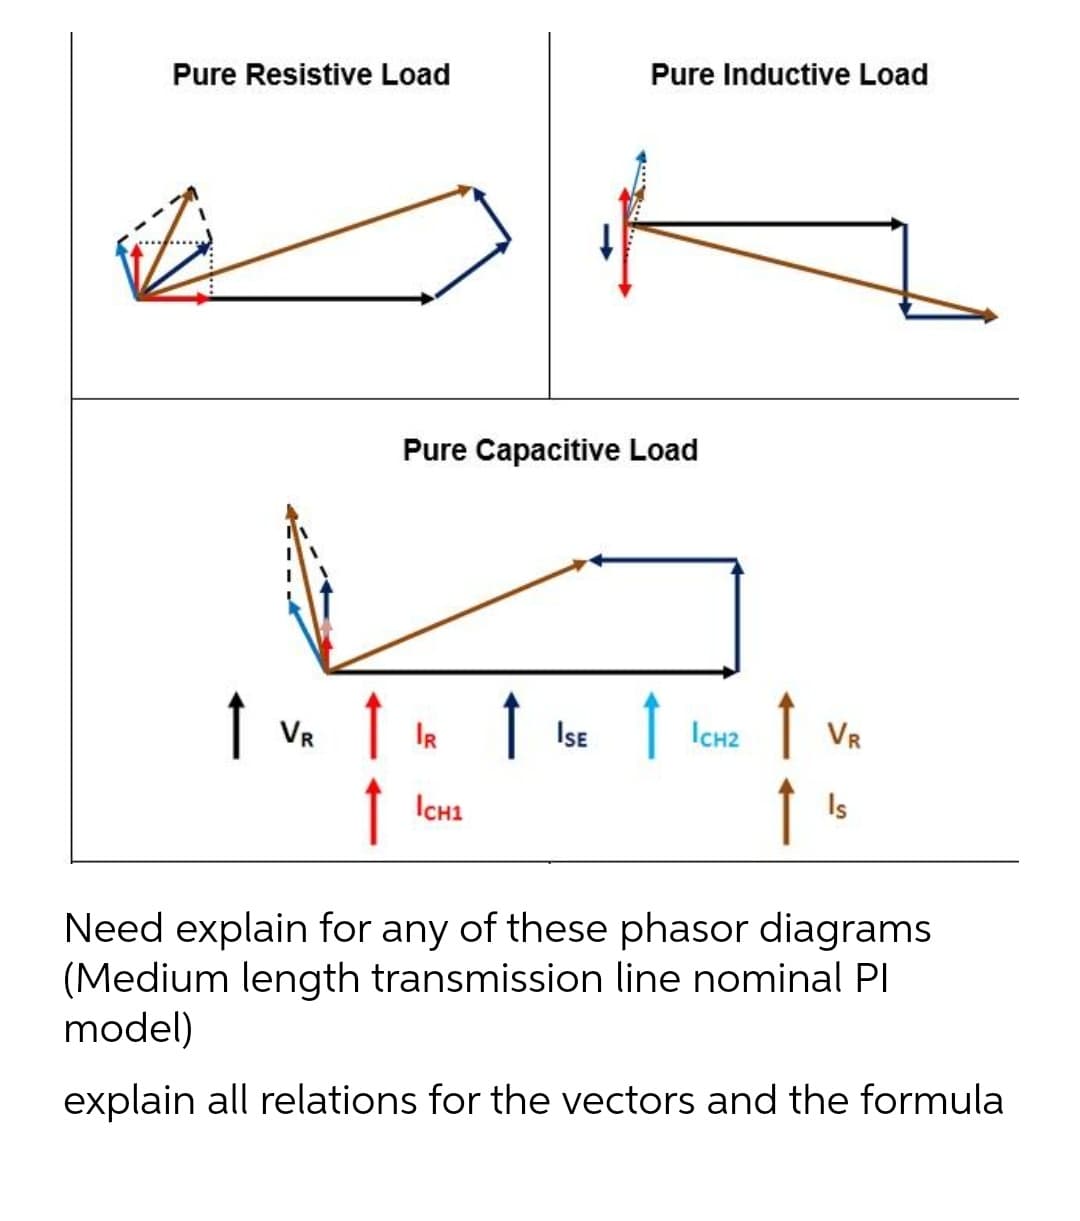 Pure Resistive Load
Pure Inductive Load
Pure Capacitive Load
↑
↑
1
I ISE
Ise 1
|ICH2
I VR
VR
IR
↑
ICH1
Is
Need explain for any of these phasor diagrams
(Medium length transmission line nominal PI
model)
explain all relations for the vectors and the formula
